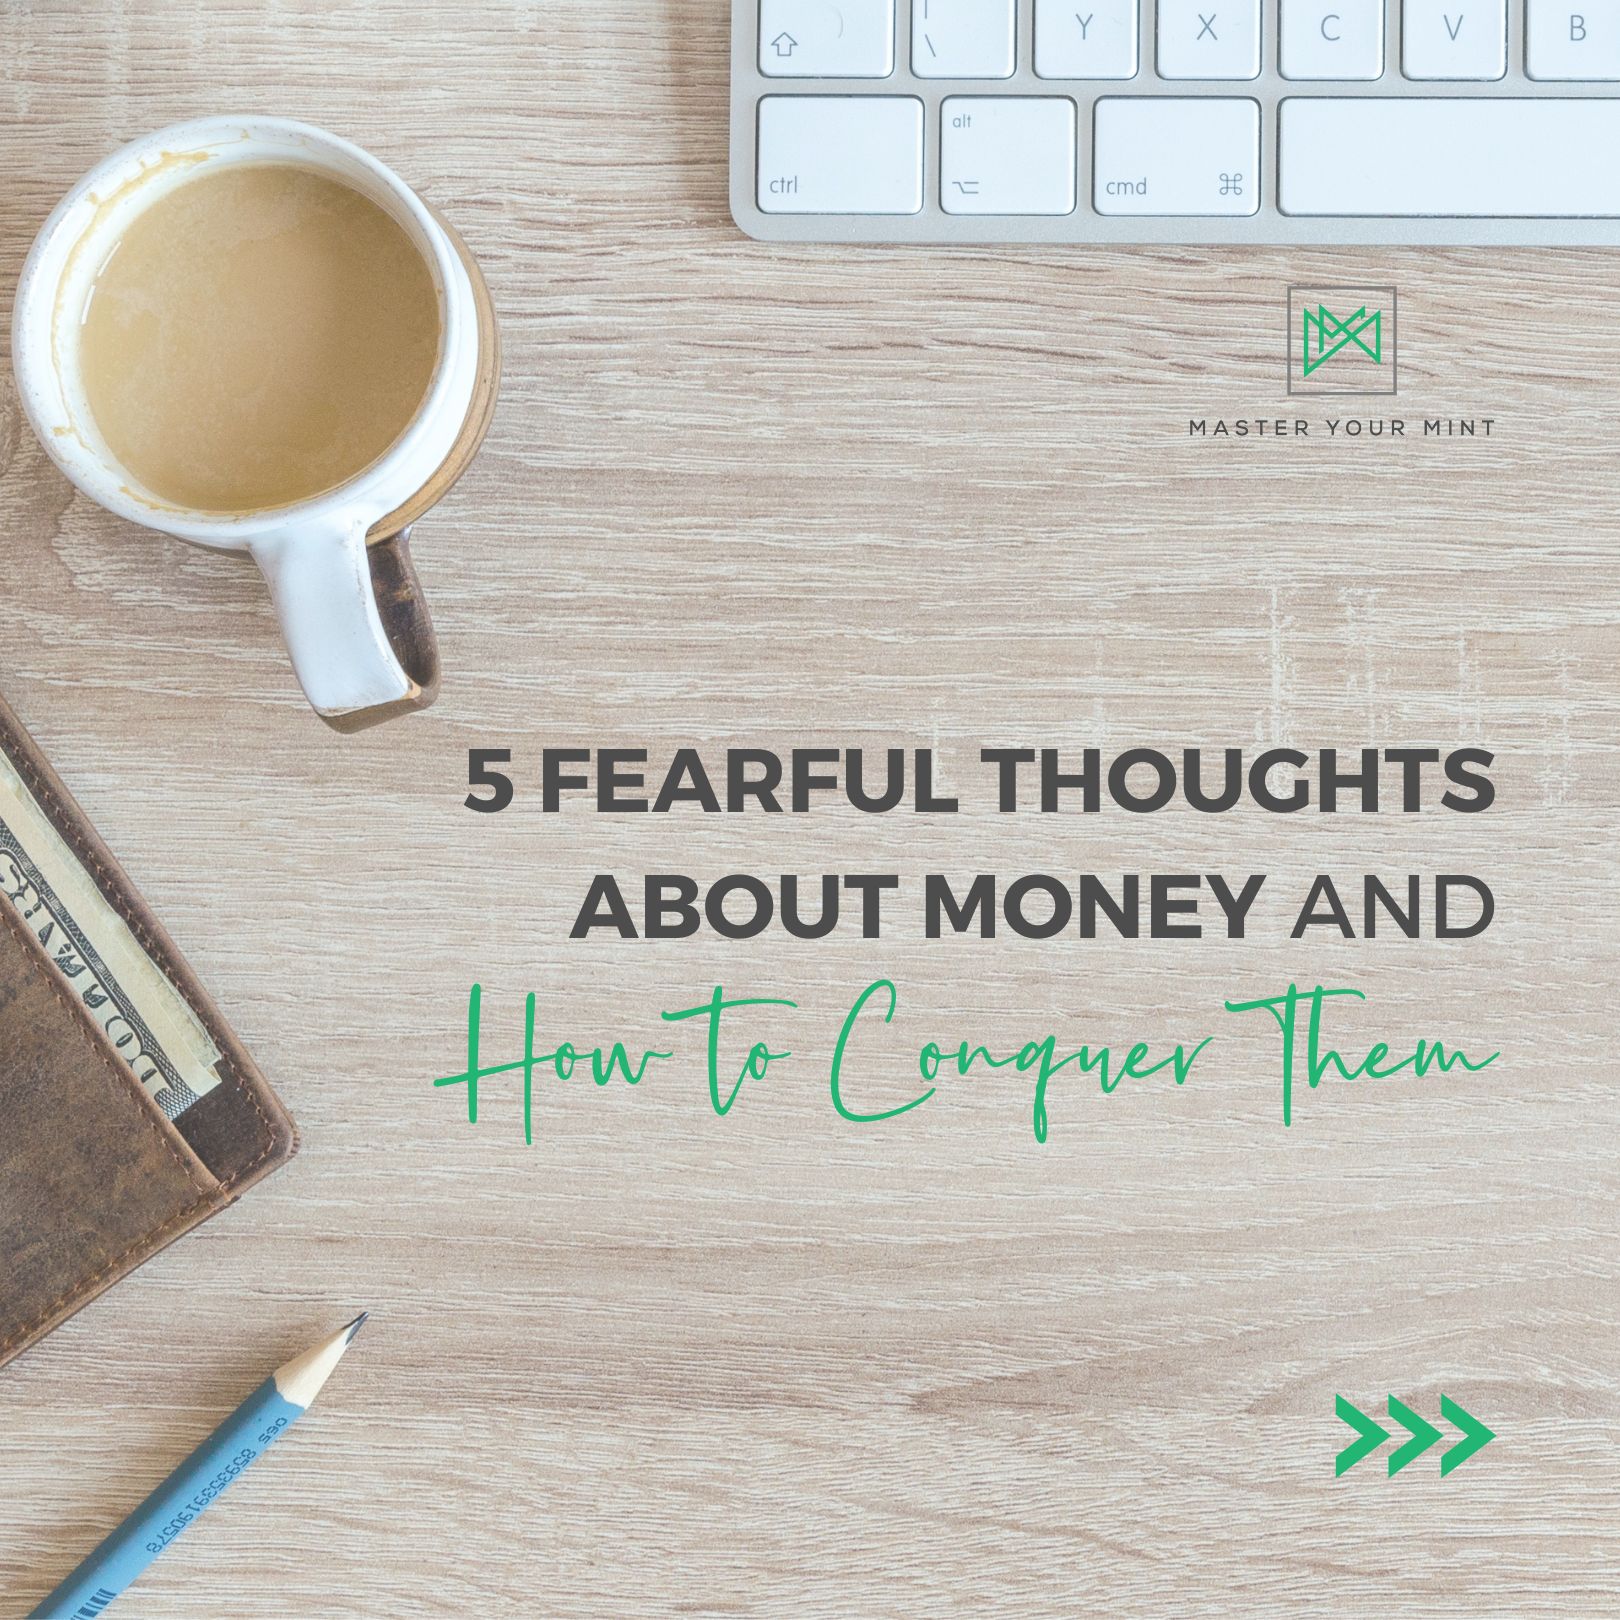 5 fearful thoughts about money